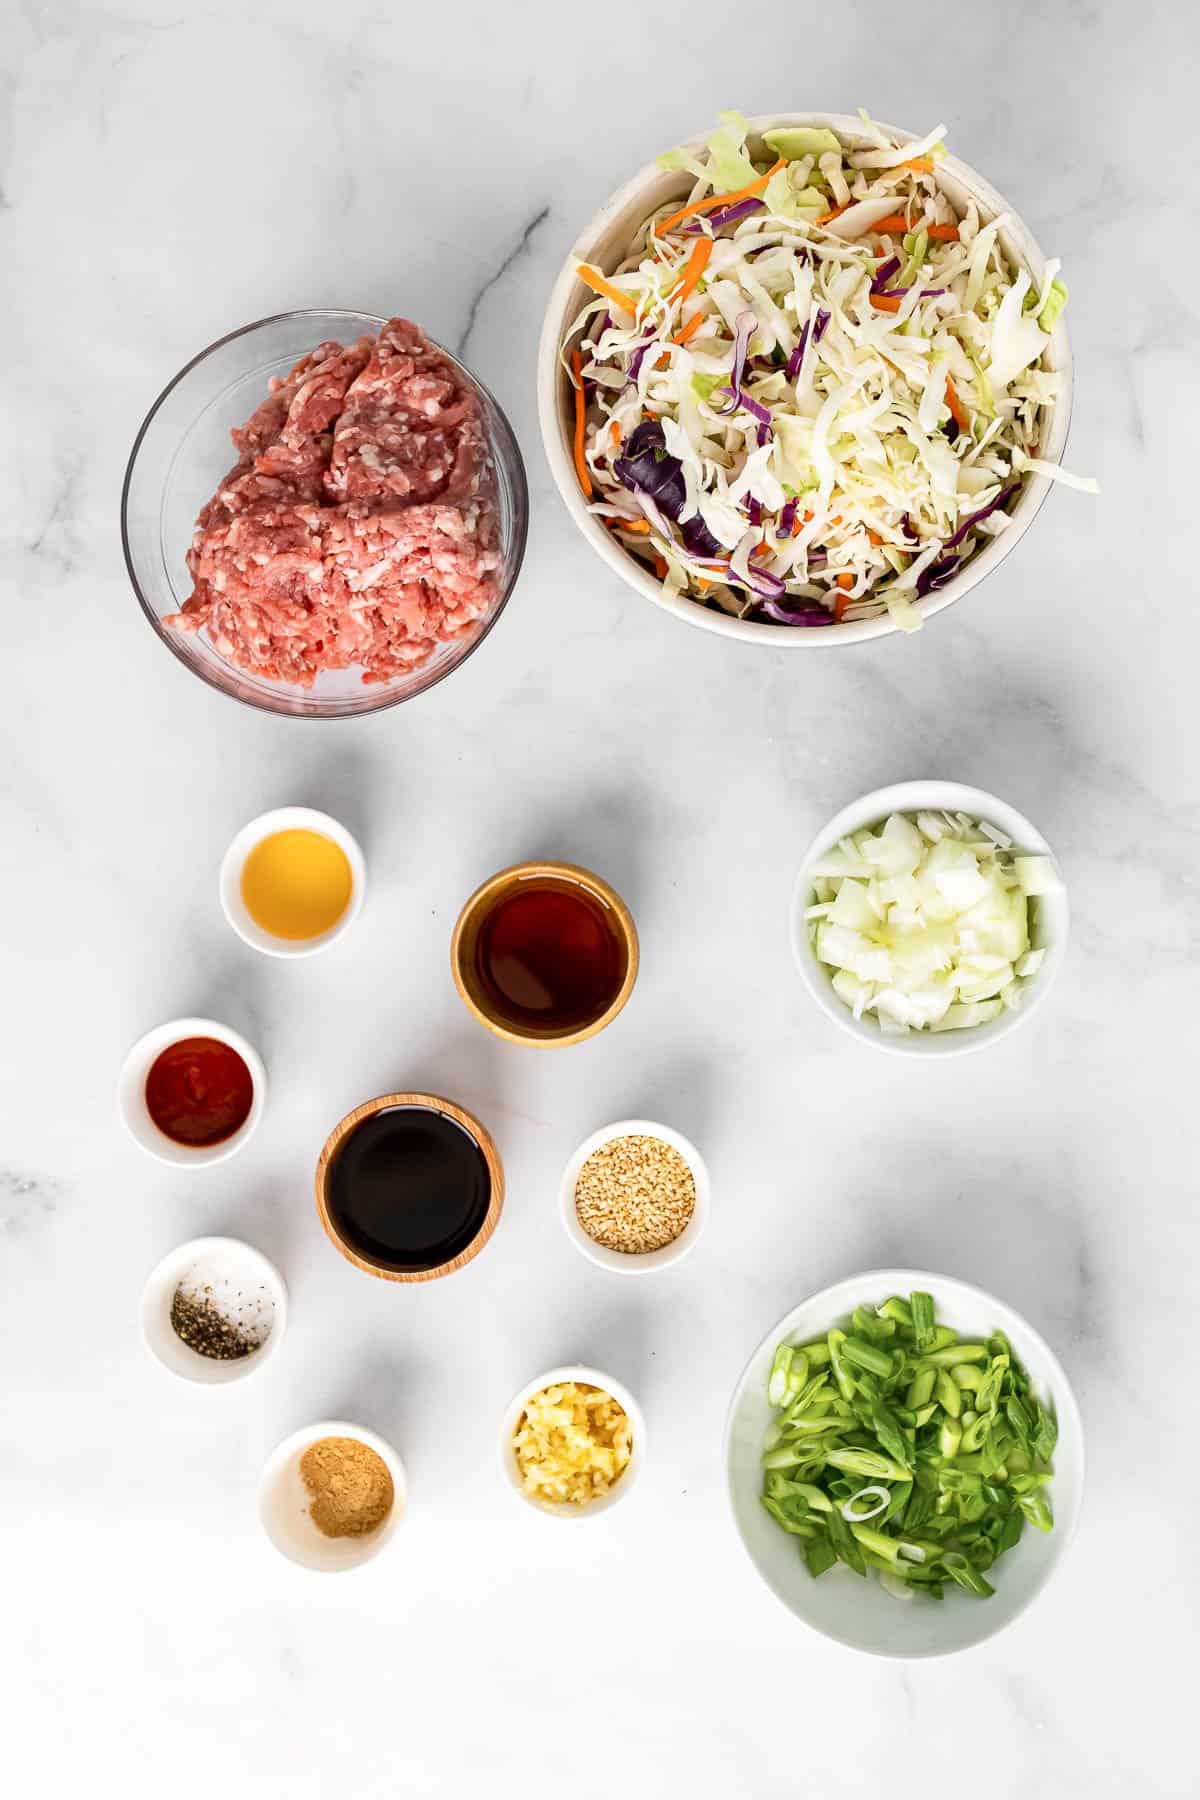 ingredients to make egg roll in a bowl - ground pork, coleslaw mix, onion, garlic, soy sauce, green onions